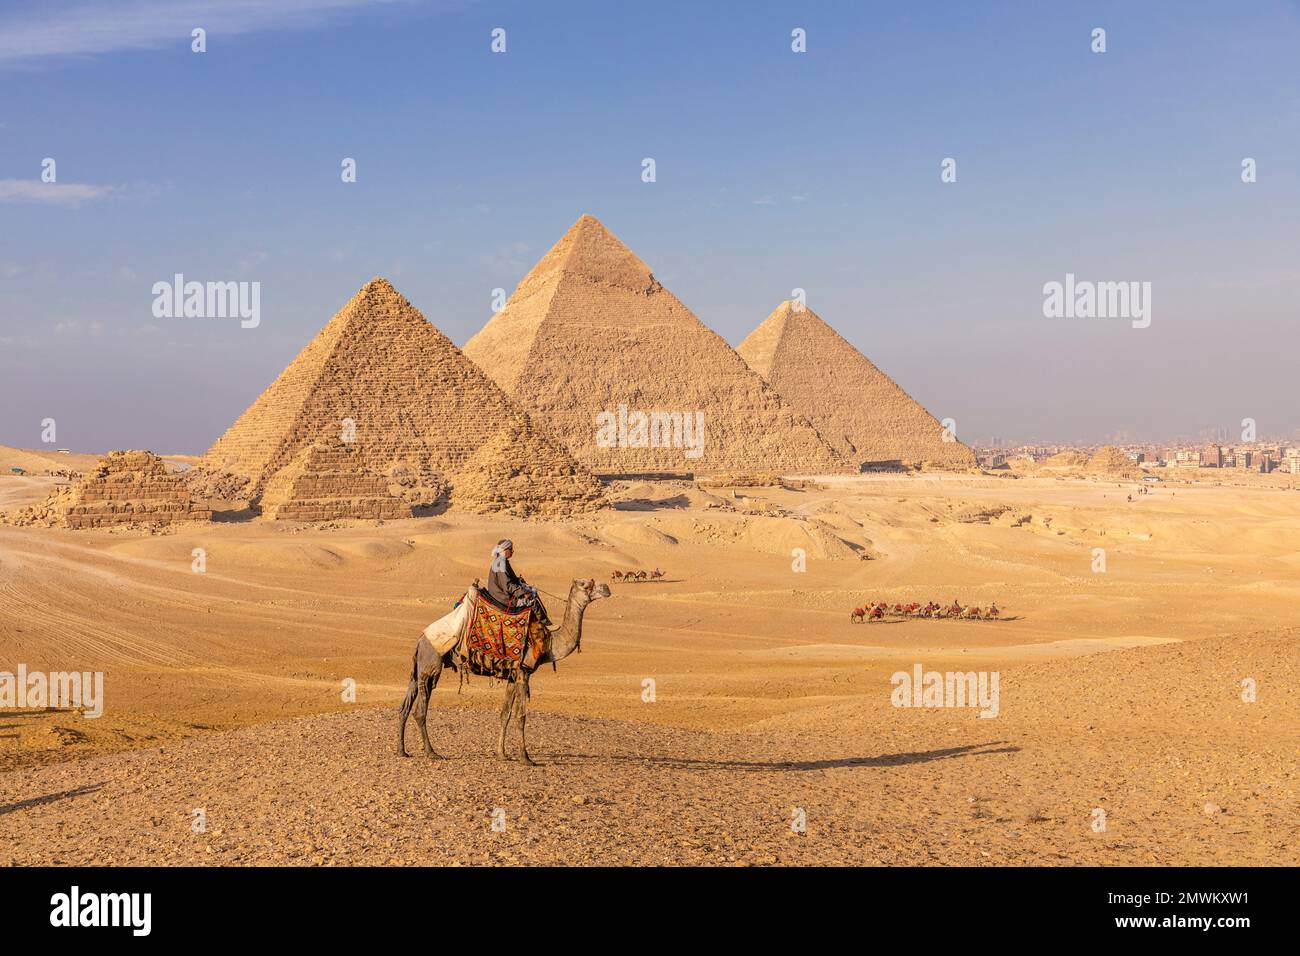 Pyramids of Giza with camel at sunset, Cairo, Egypt Stock Photo